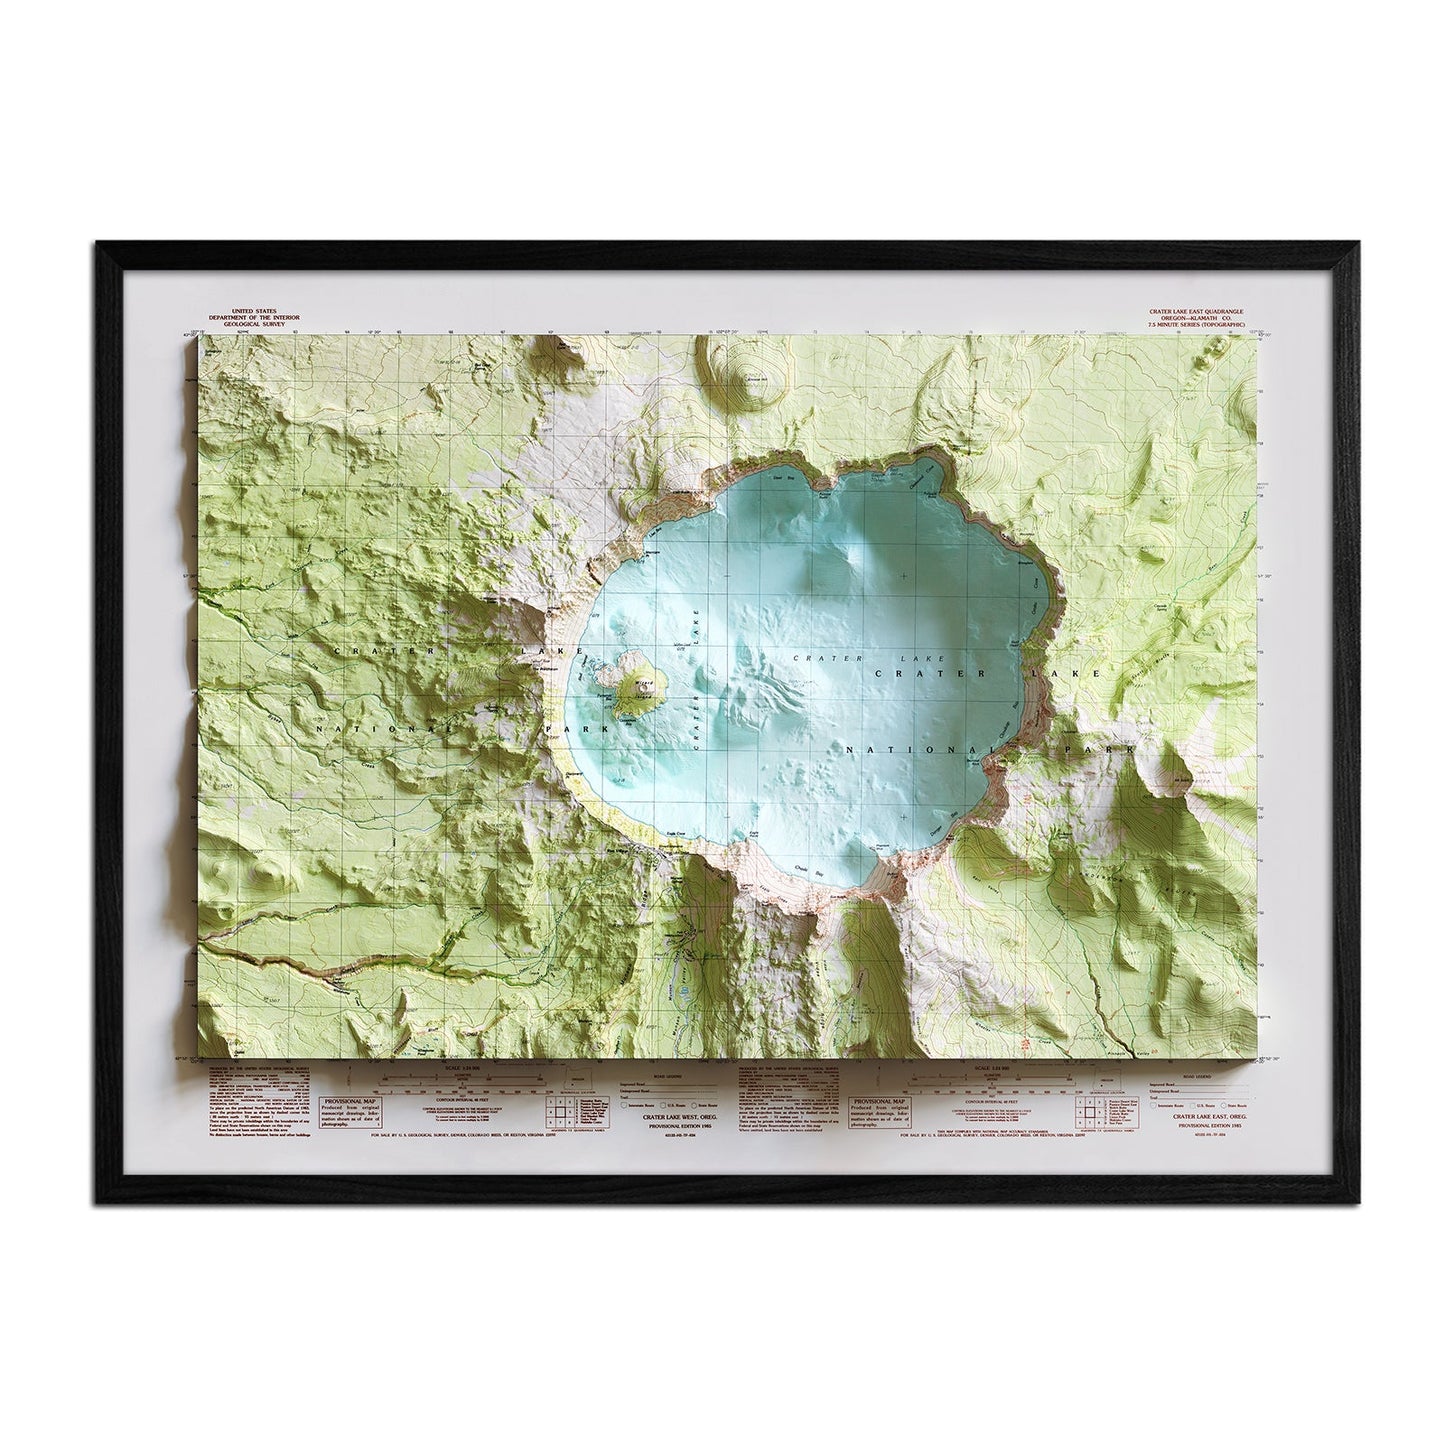 Crater Lake Relief Map - 1985